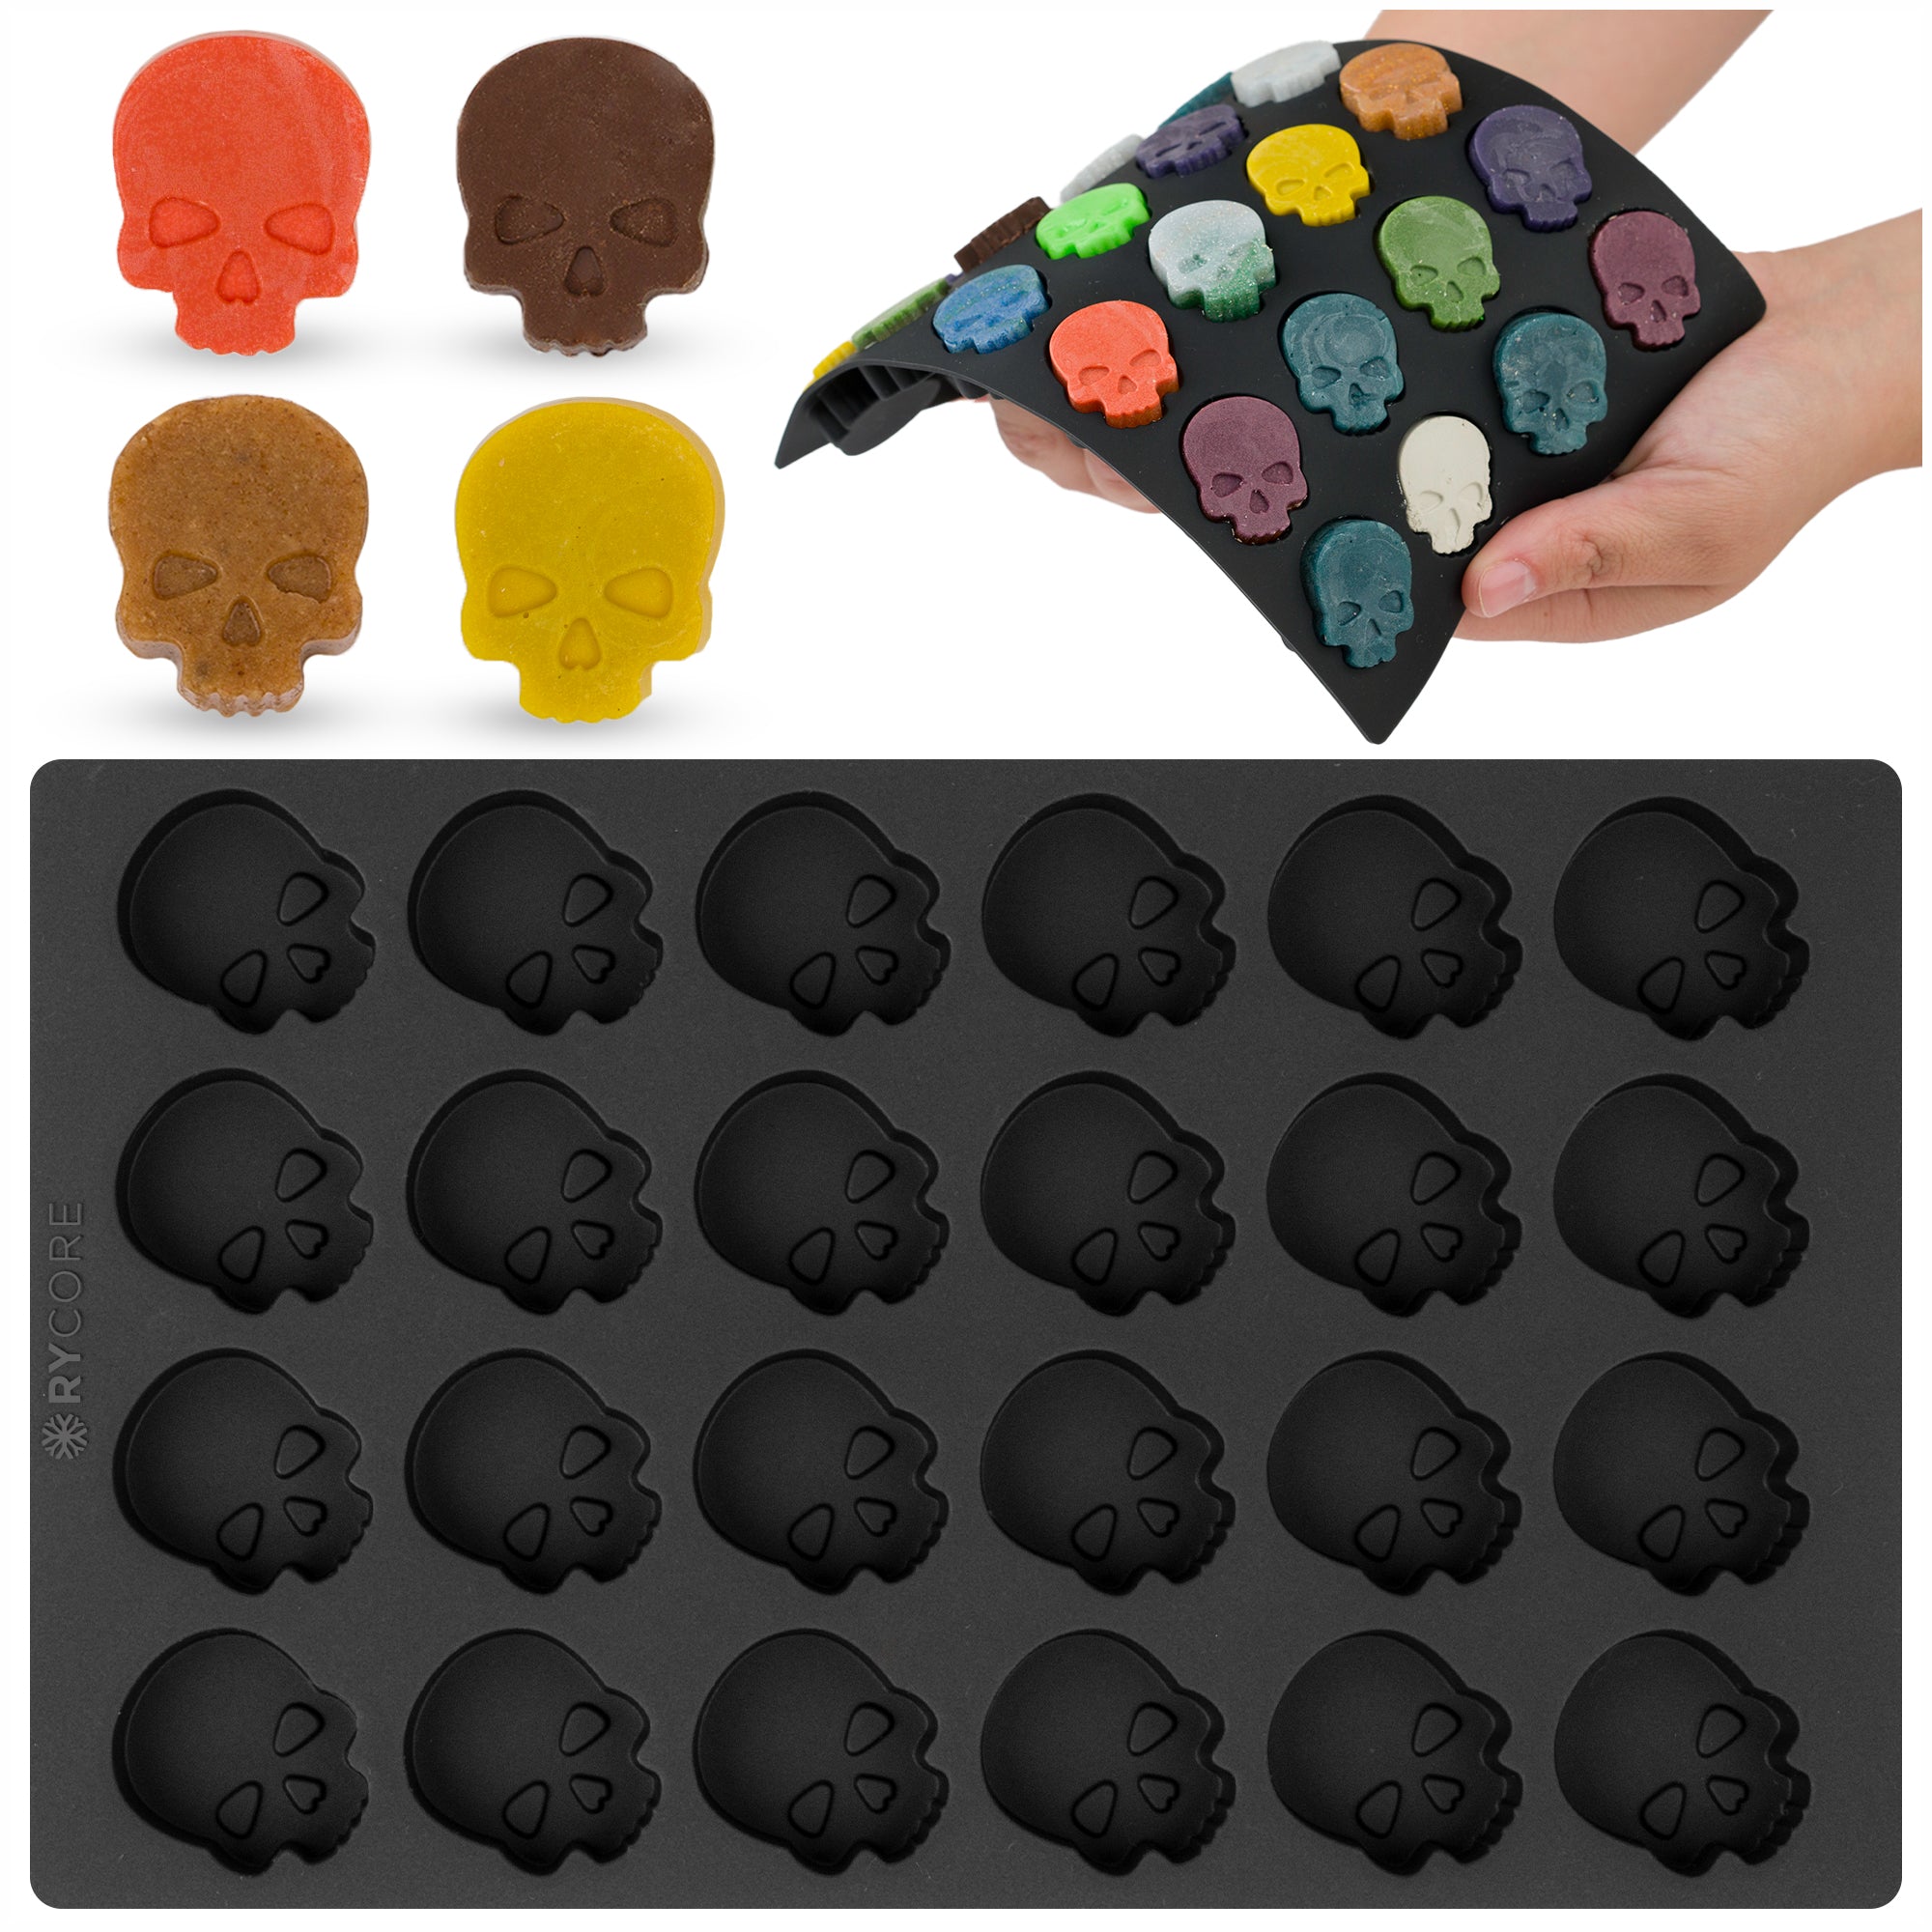 Silicone Skull Mold for Baking, Chocolates & Desserts